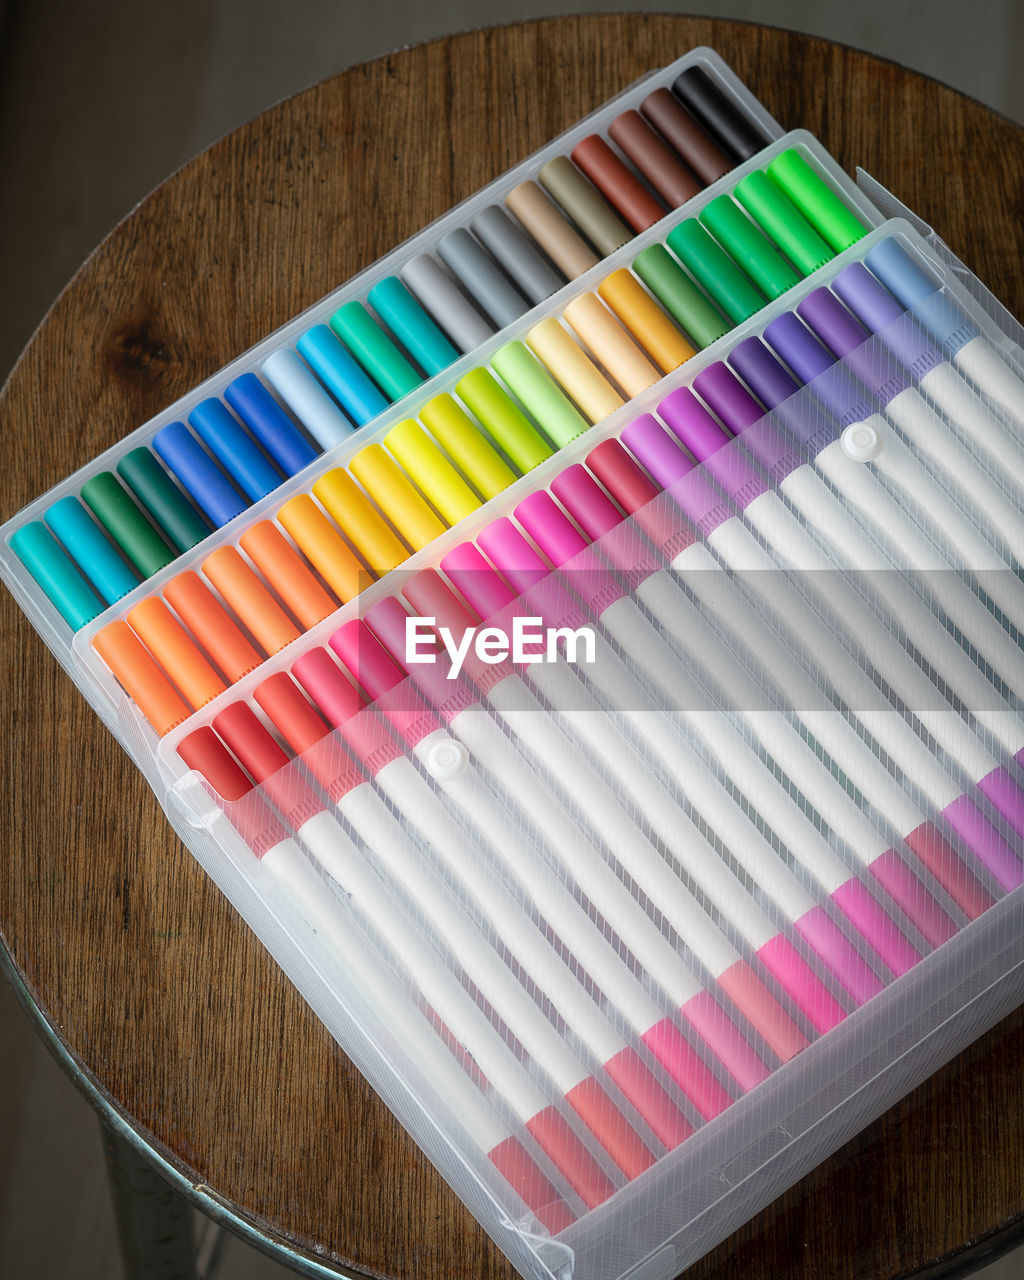 60 pieces of colorful markers in transparent plastic packaging on a wooden background.